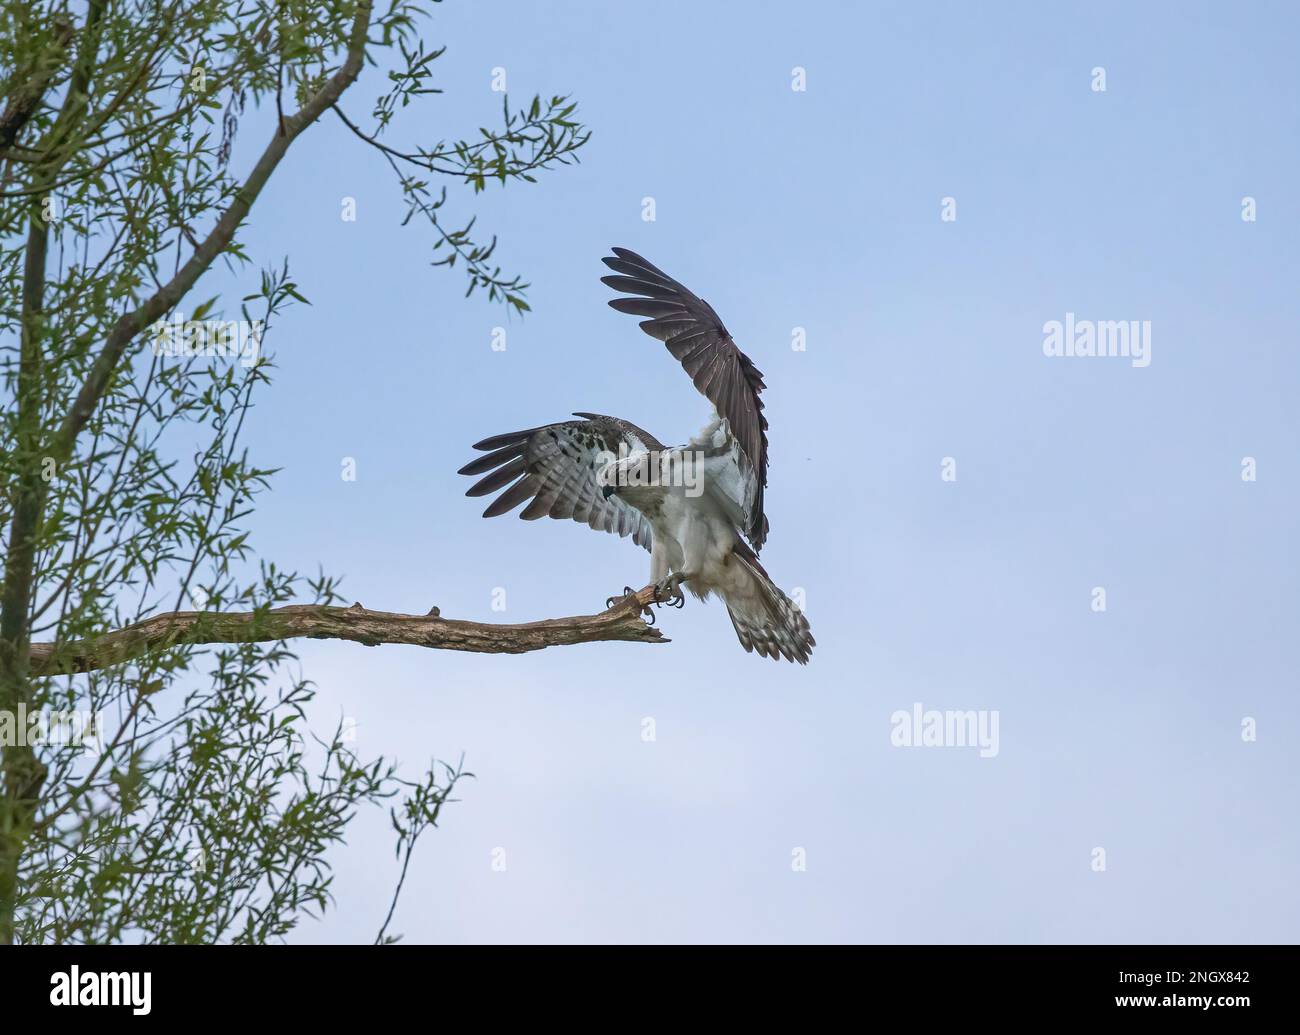 An action  shot of an Osprey (Pandion haliaetus) coming in to land on a dead branch, huge wings and talons outstretched showing feather detail .  UK Stock Photo